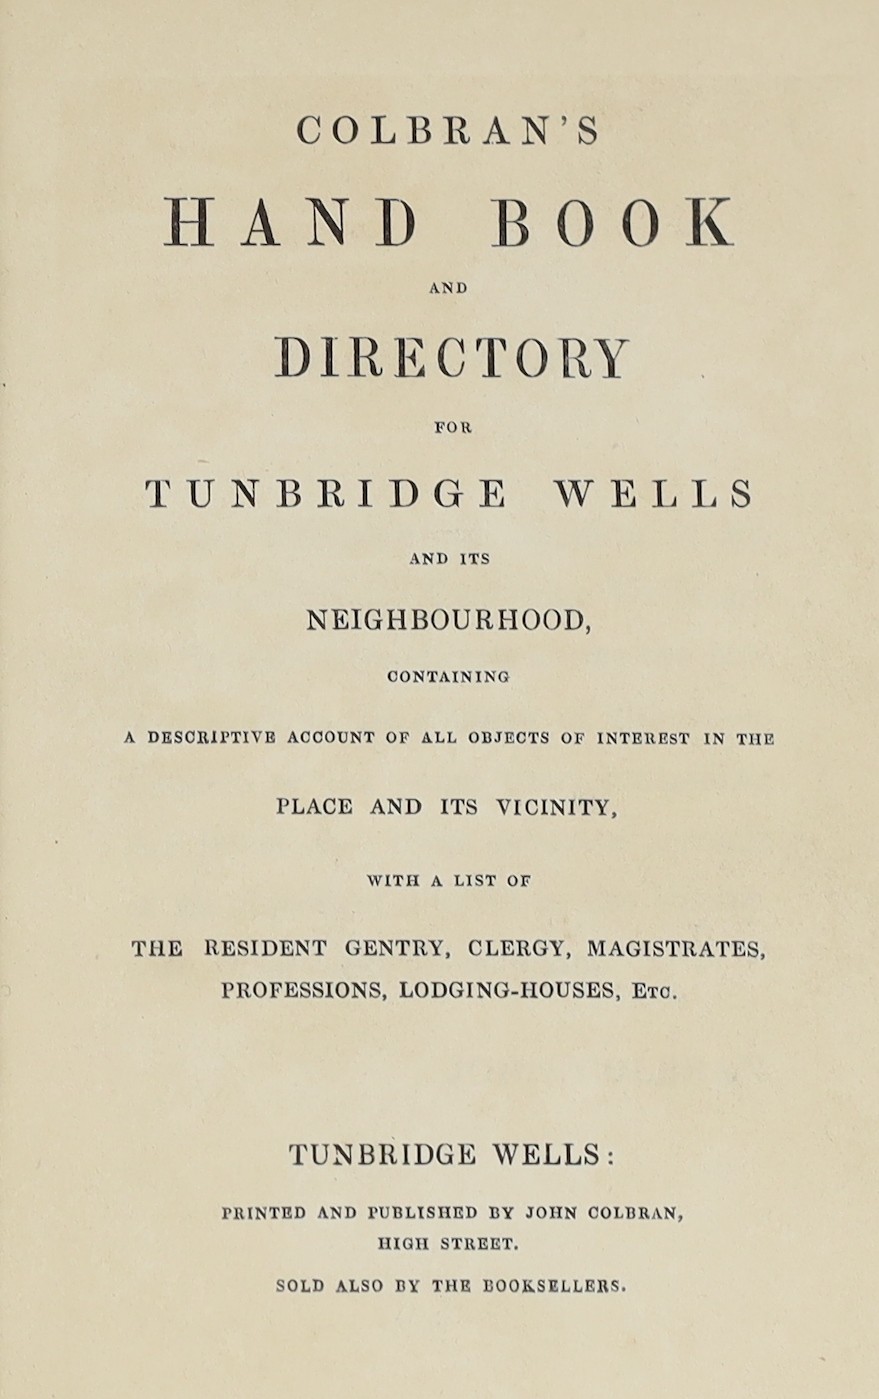 KENT, TUNBRIDGE WELLS: Colbran's New Guide for Tunbridge Wells, (Abridged)... Edited by James Phippen, 10 plates, text illus.; rebound half calf marbled boards, 12mo. Tunbridge Wells: printed and published by John Colbra